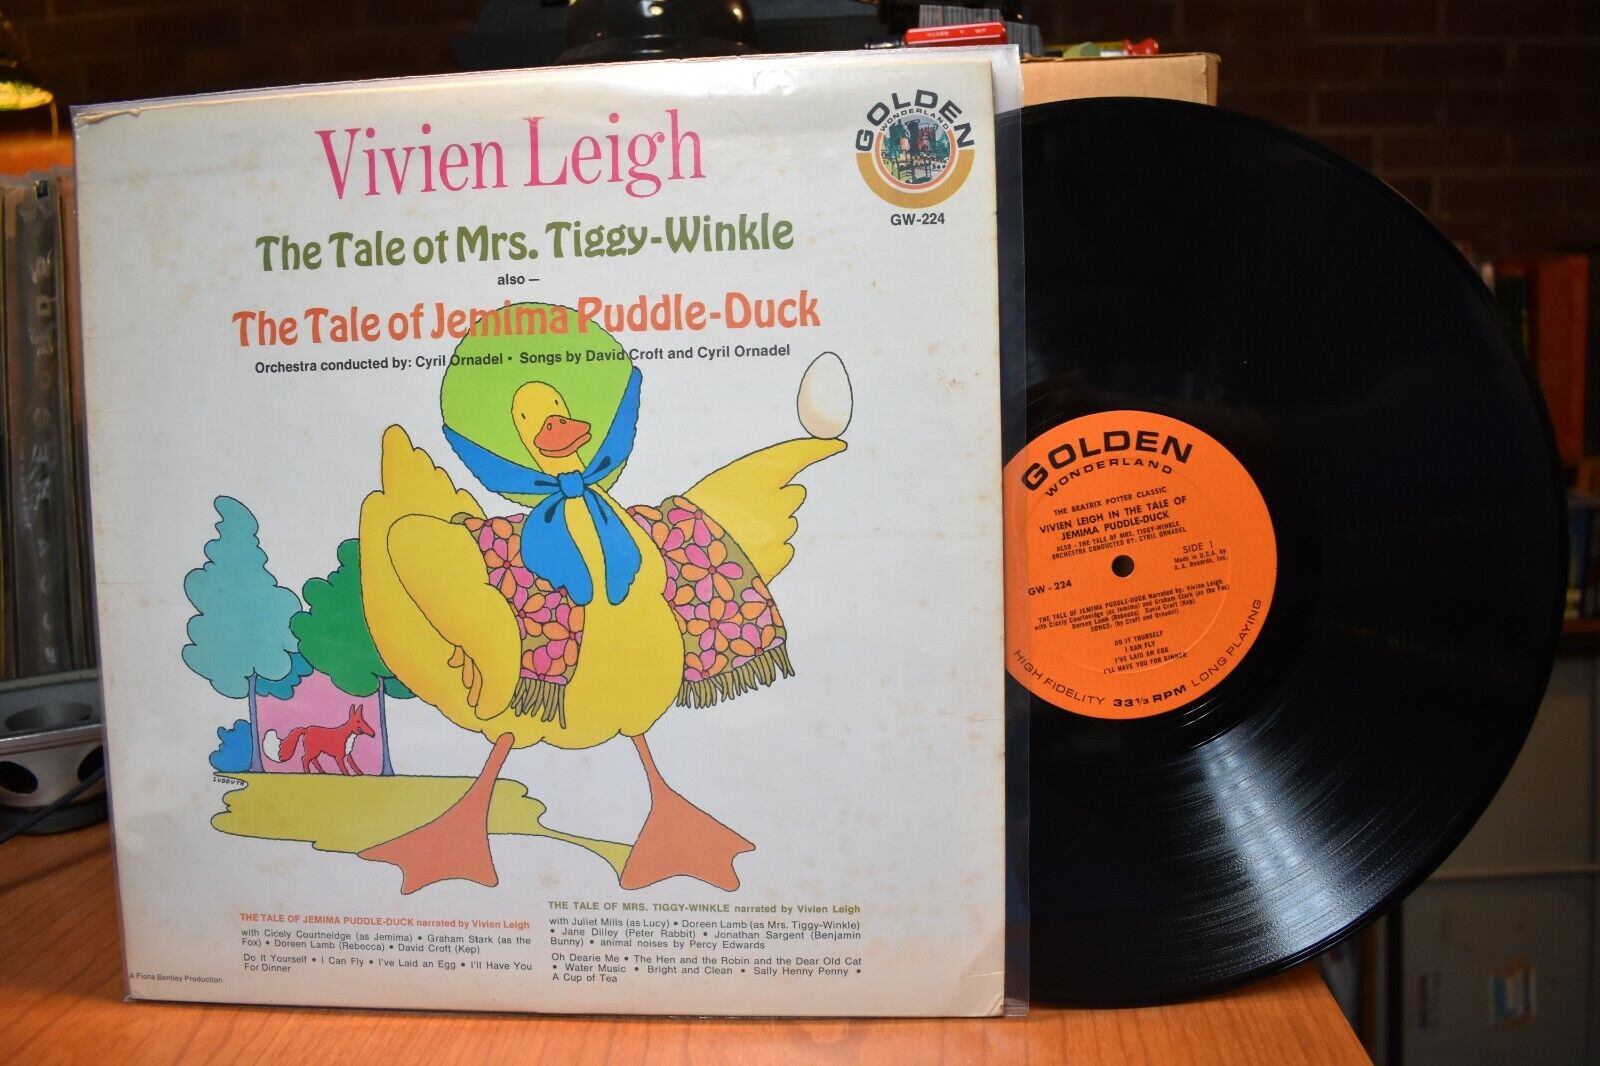 Vivien Leigh The Tale of Mrs. Tiggy-Winkle Jemima Puddle Duck LP Golden GW224 MN